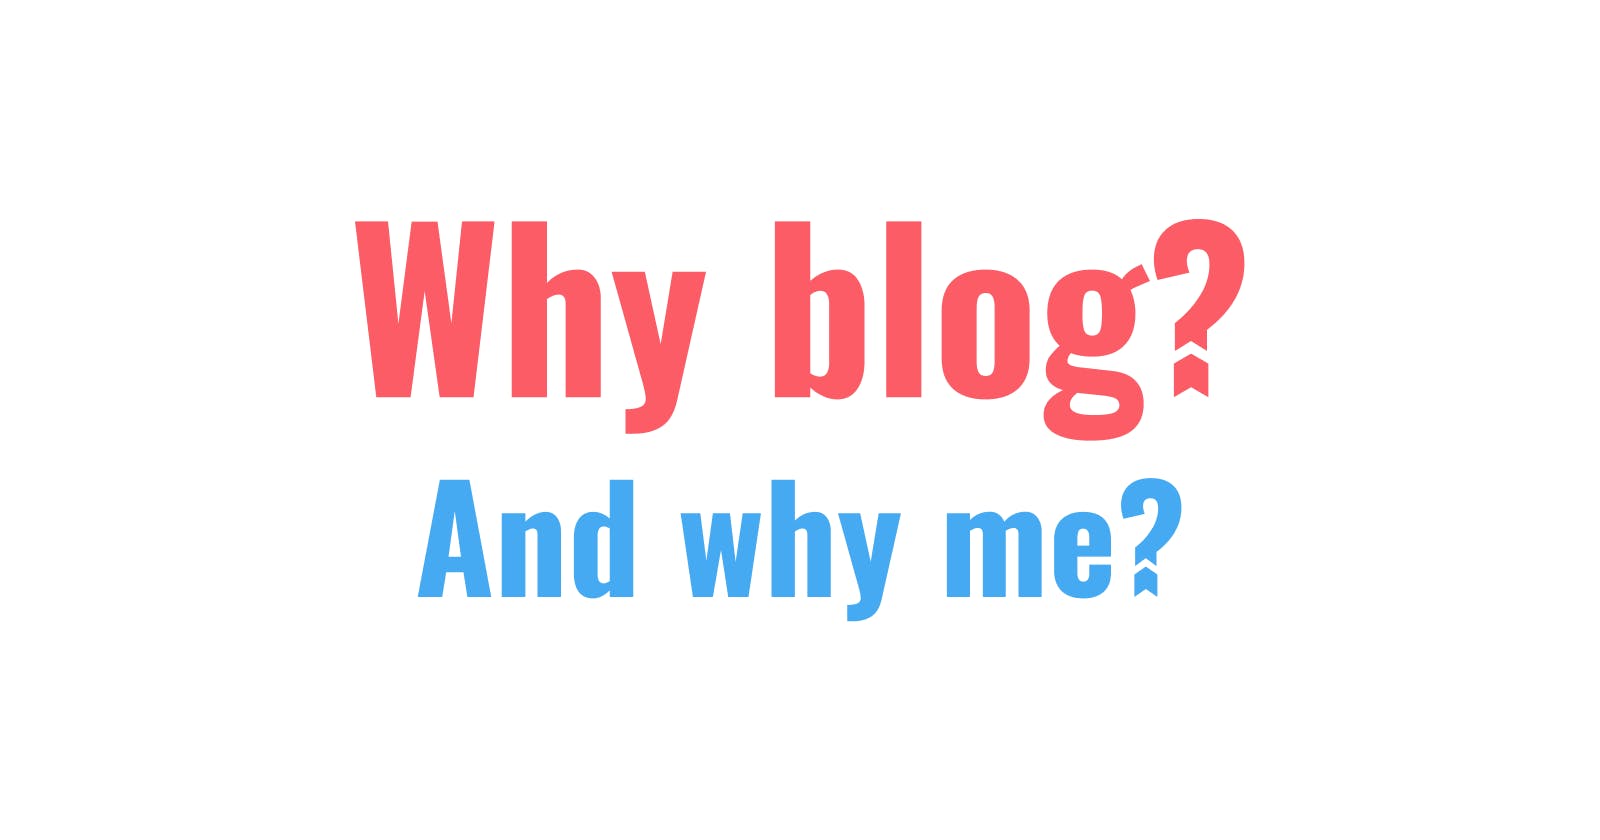 My Philosophy behind blogging. Why I started and why you should too?